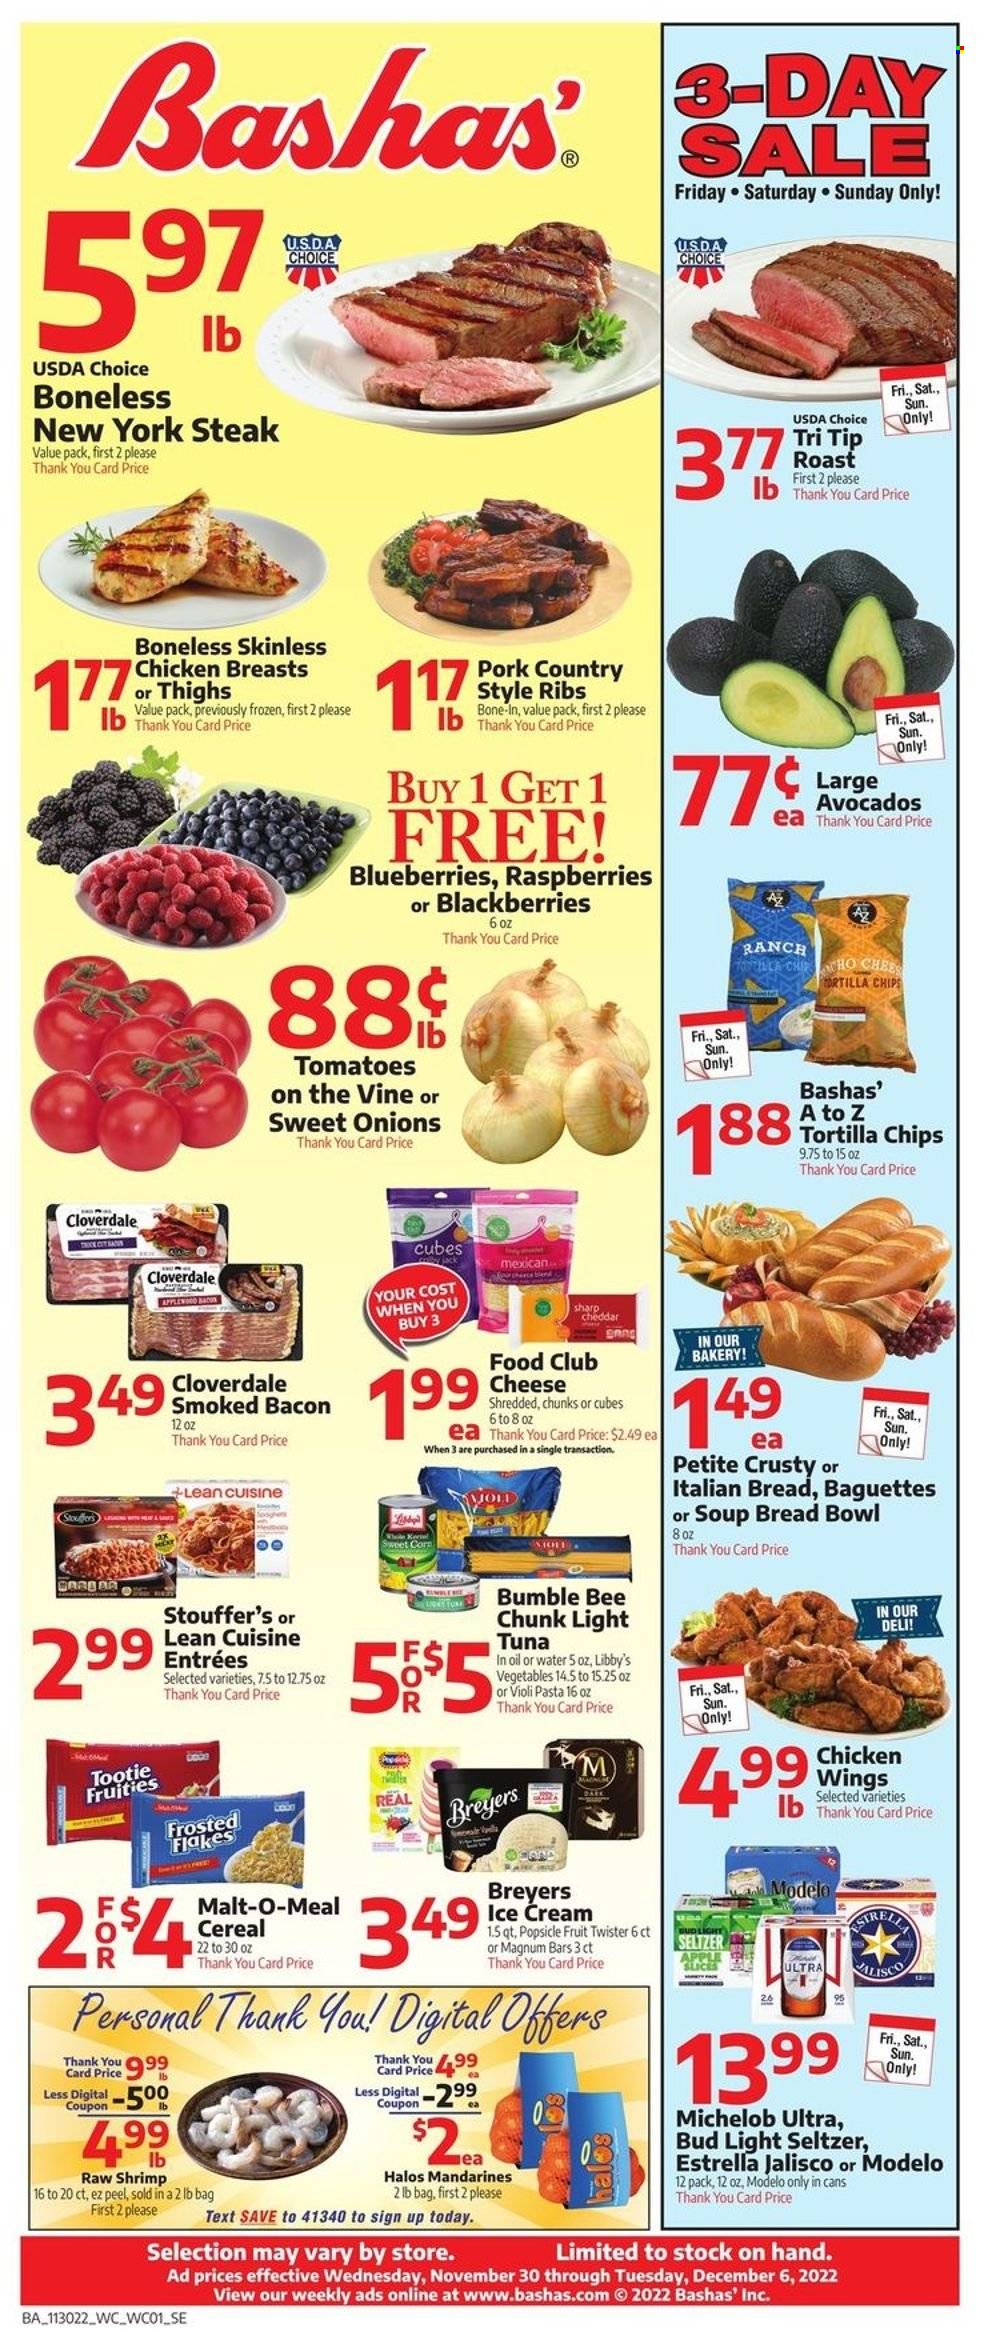 thumbnail - Bashas' Flyer - 11/30/2022 - 12/06/2022 - Sales products - baguette, tomatoes, blackberries, blueberries, mandarines, tuna, shrimps, soup, pasta, Bumble Bee, Lean Cuisine, bacon, cheese, ice cream, chicken wings, Stouffer's, tortilla chips, light tuna, cereals, Frosted Flakes, Hard Seltzer, beer, Bud Light, Modelo, chicken breasts, steak, pork ribs, country style ribs, Michelob. Page 1.